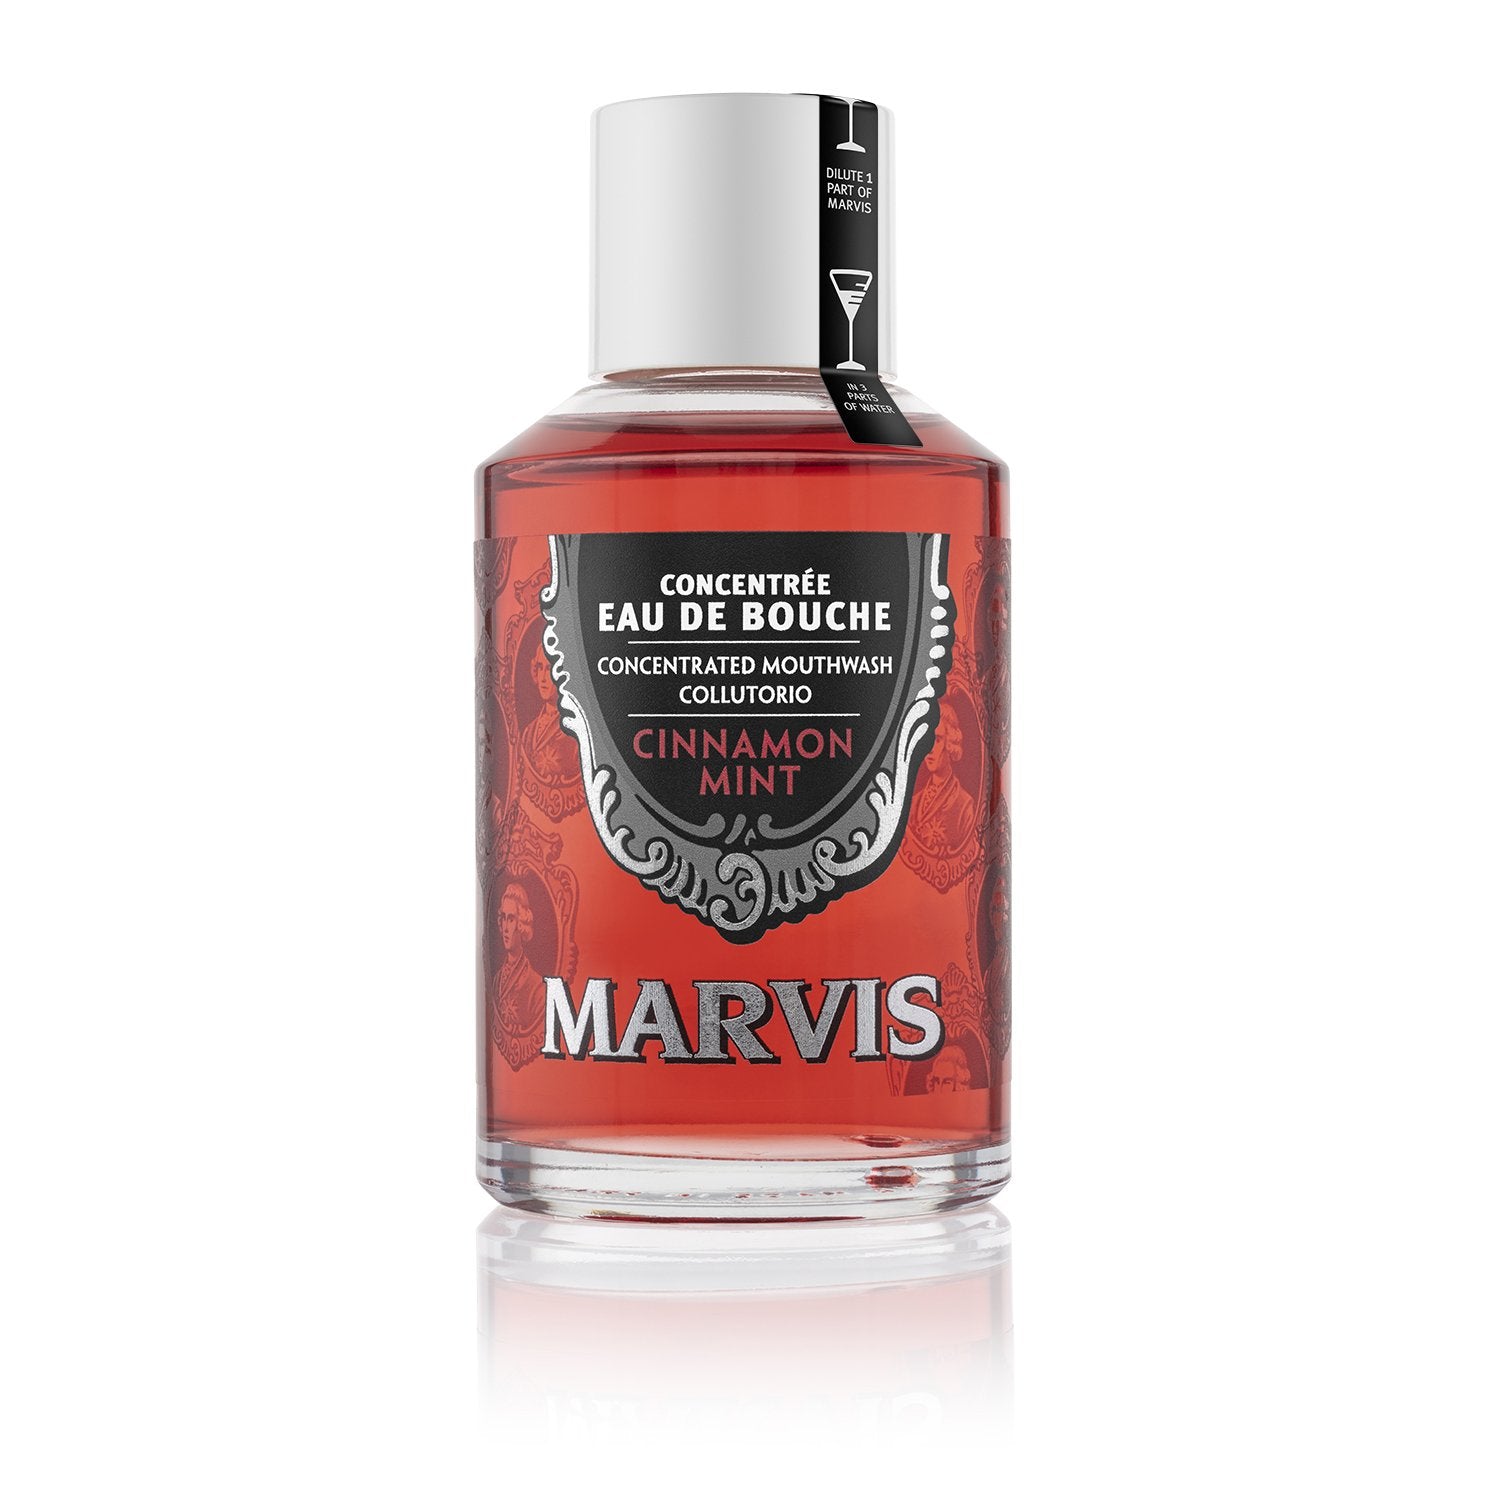 Marvis Concentrated Mouthwash Cinnamon Mint (120ml)